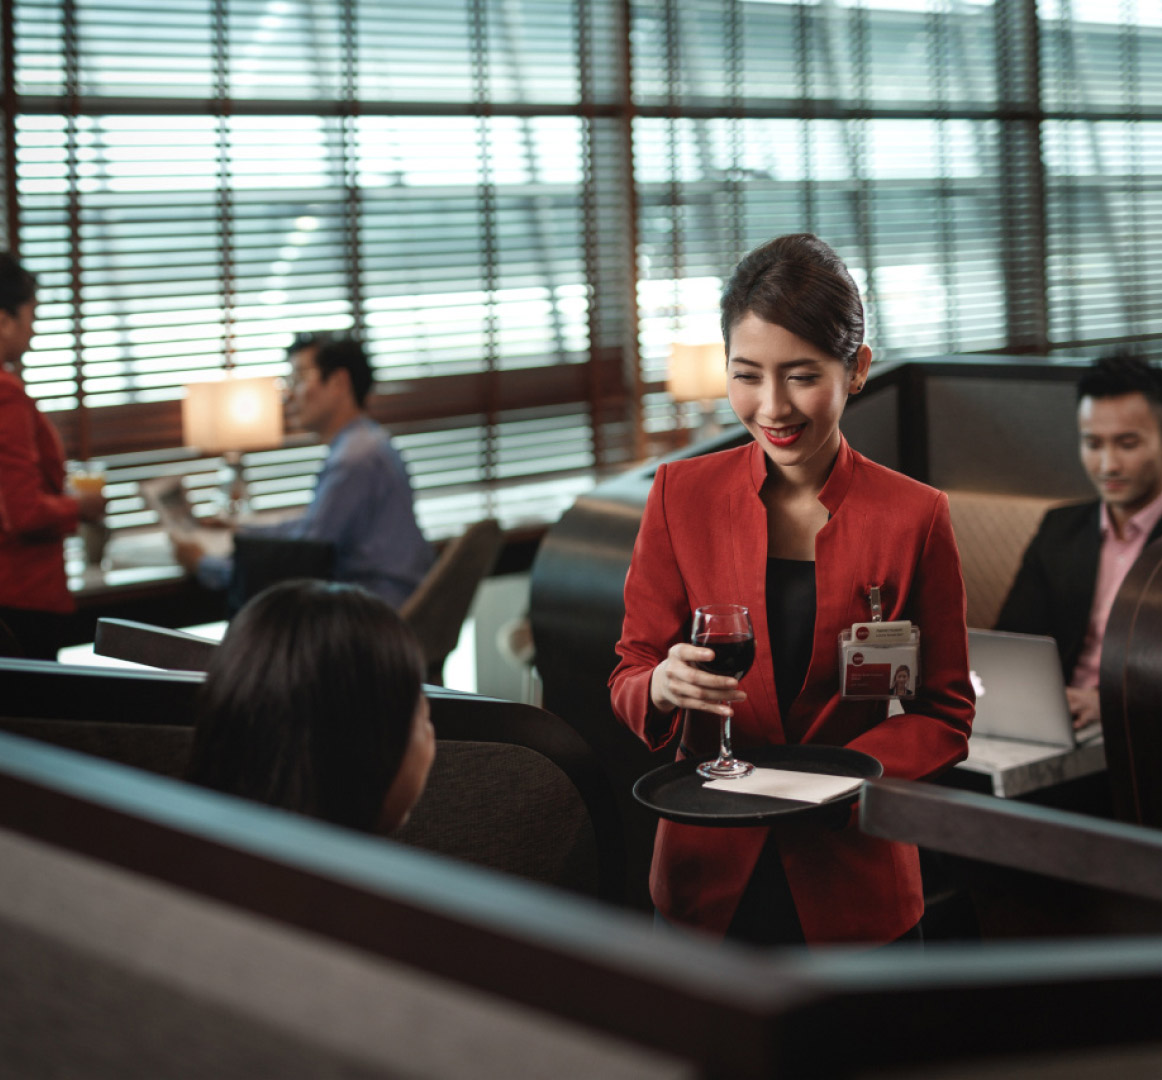 Customer service officer serving drinks to passenger at lounge 